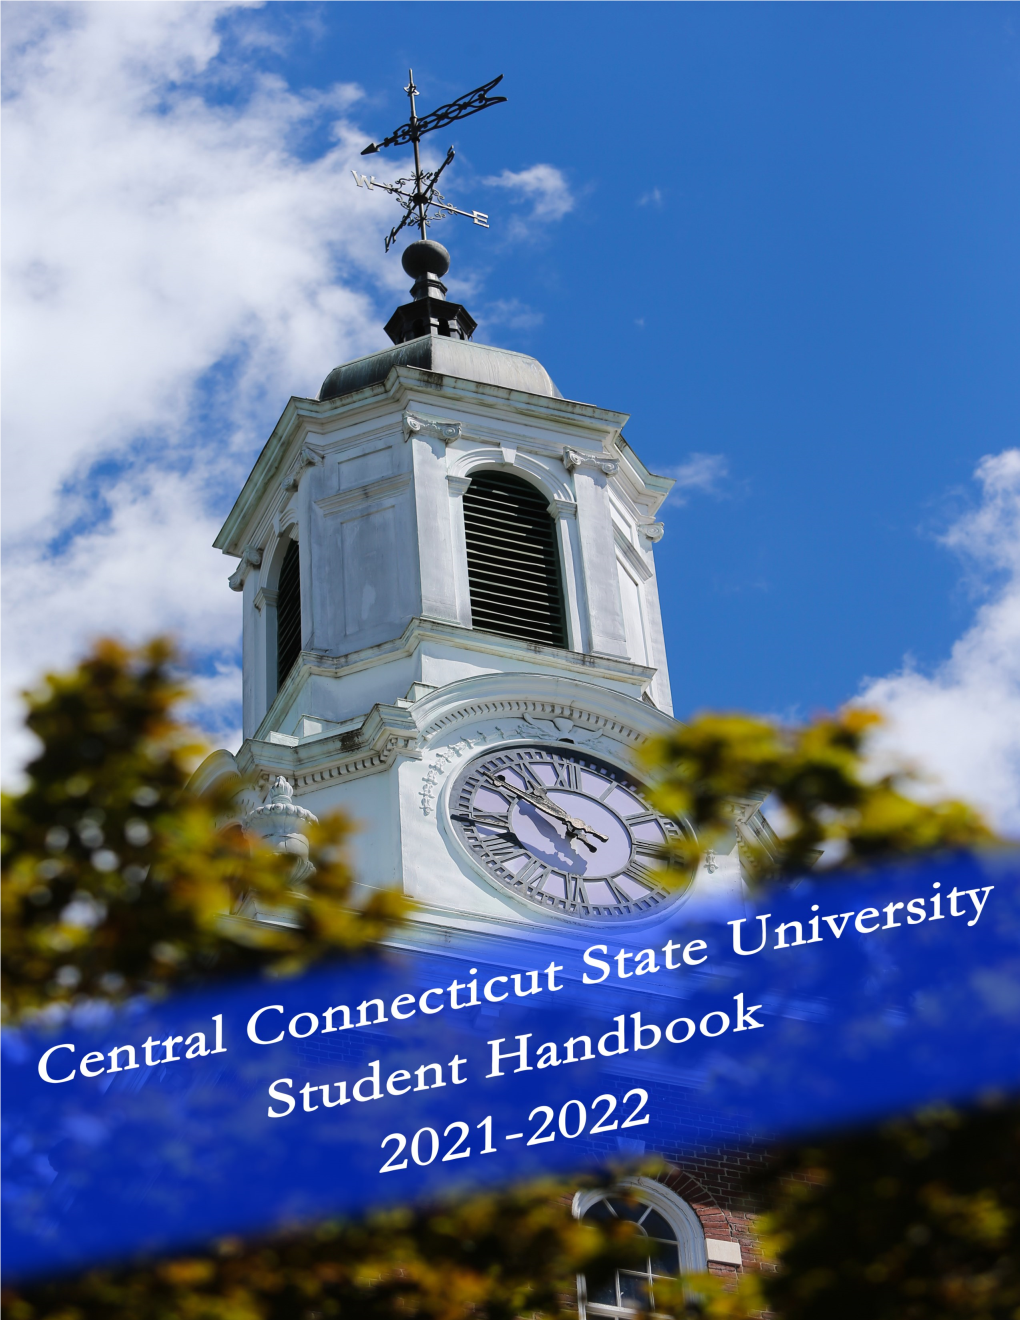 Student Handbook Is Published Under the Auspices of the Student Affairs Office